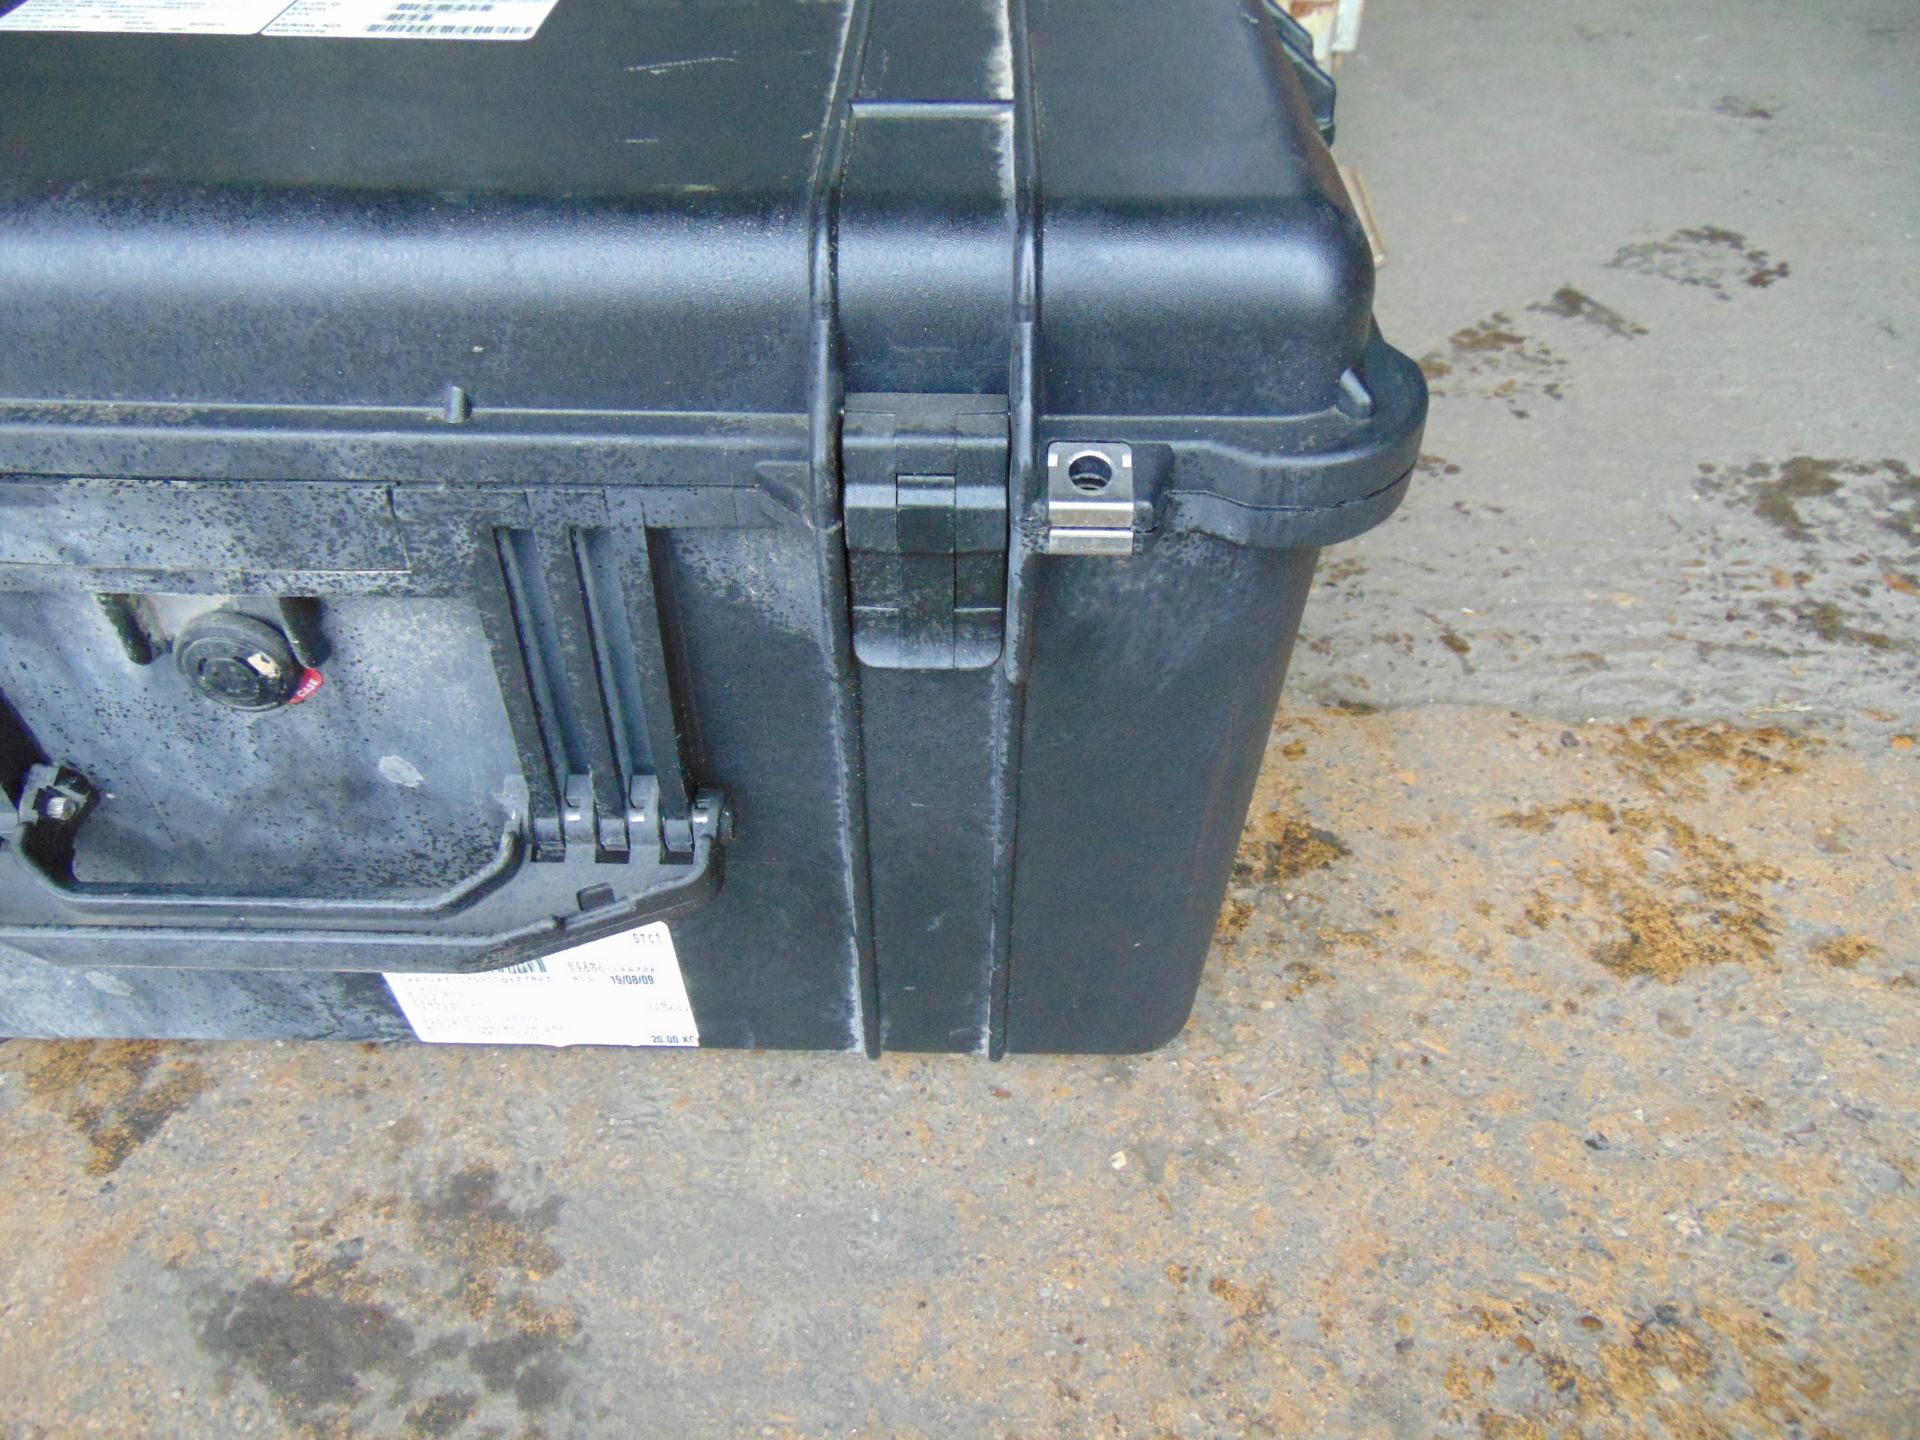 1 x High Impact Roll Along Water proof Luggage Case can be used for Aircraft etc - Image 8 of 9